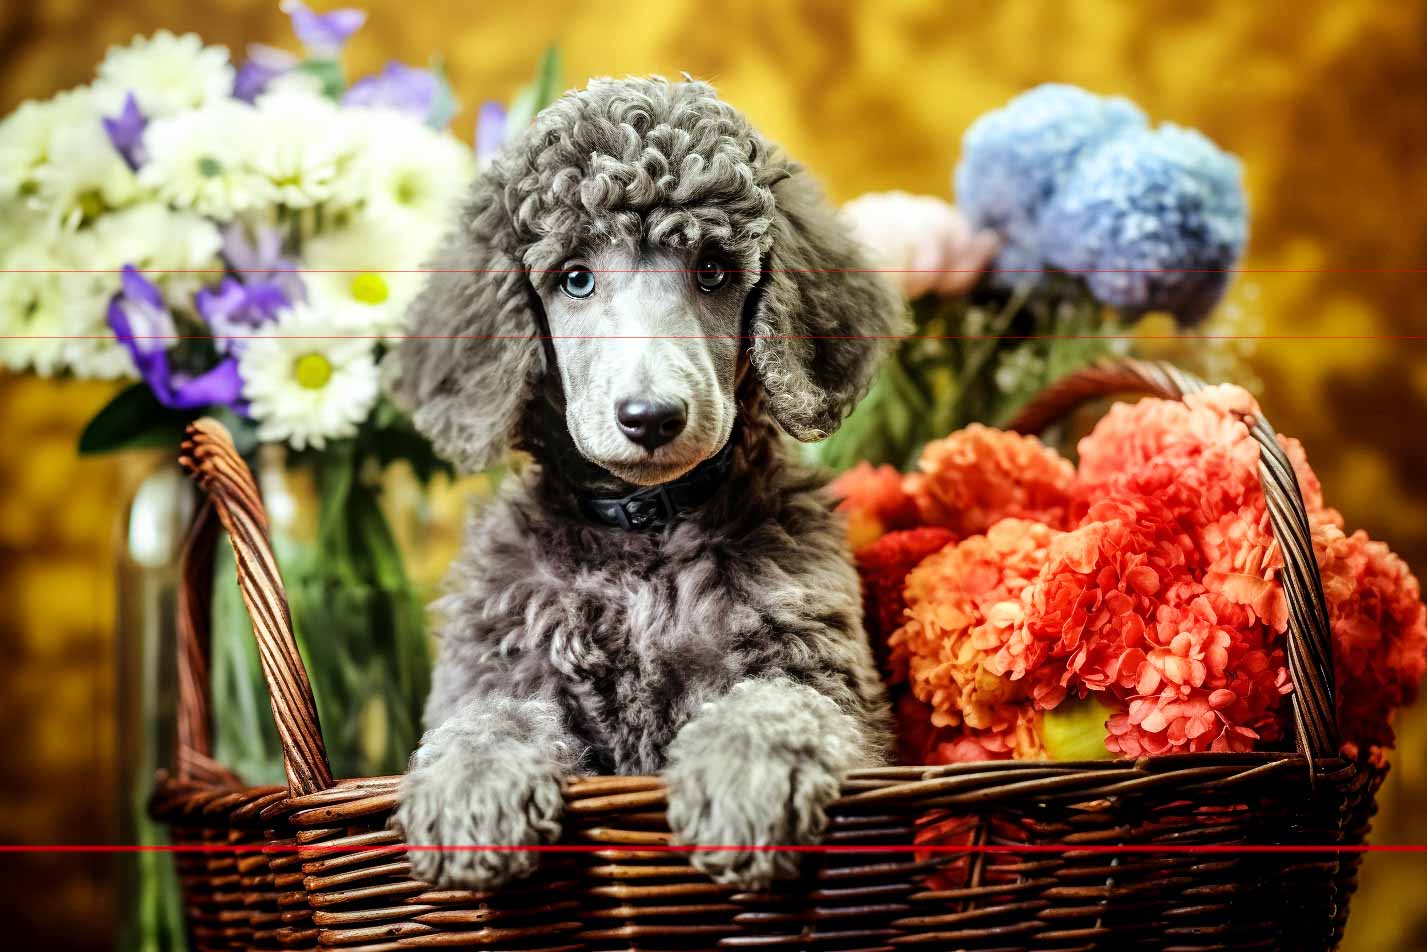 Standard Silver Poodle Puppy In Basket with Daisies